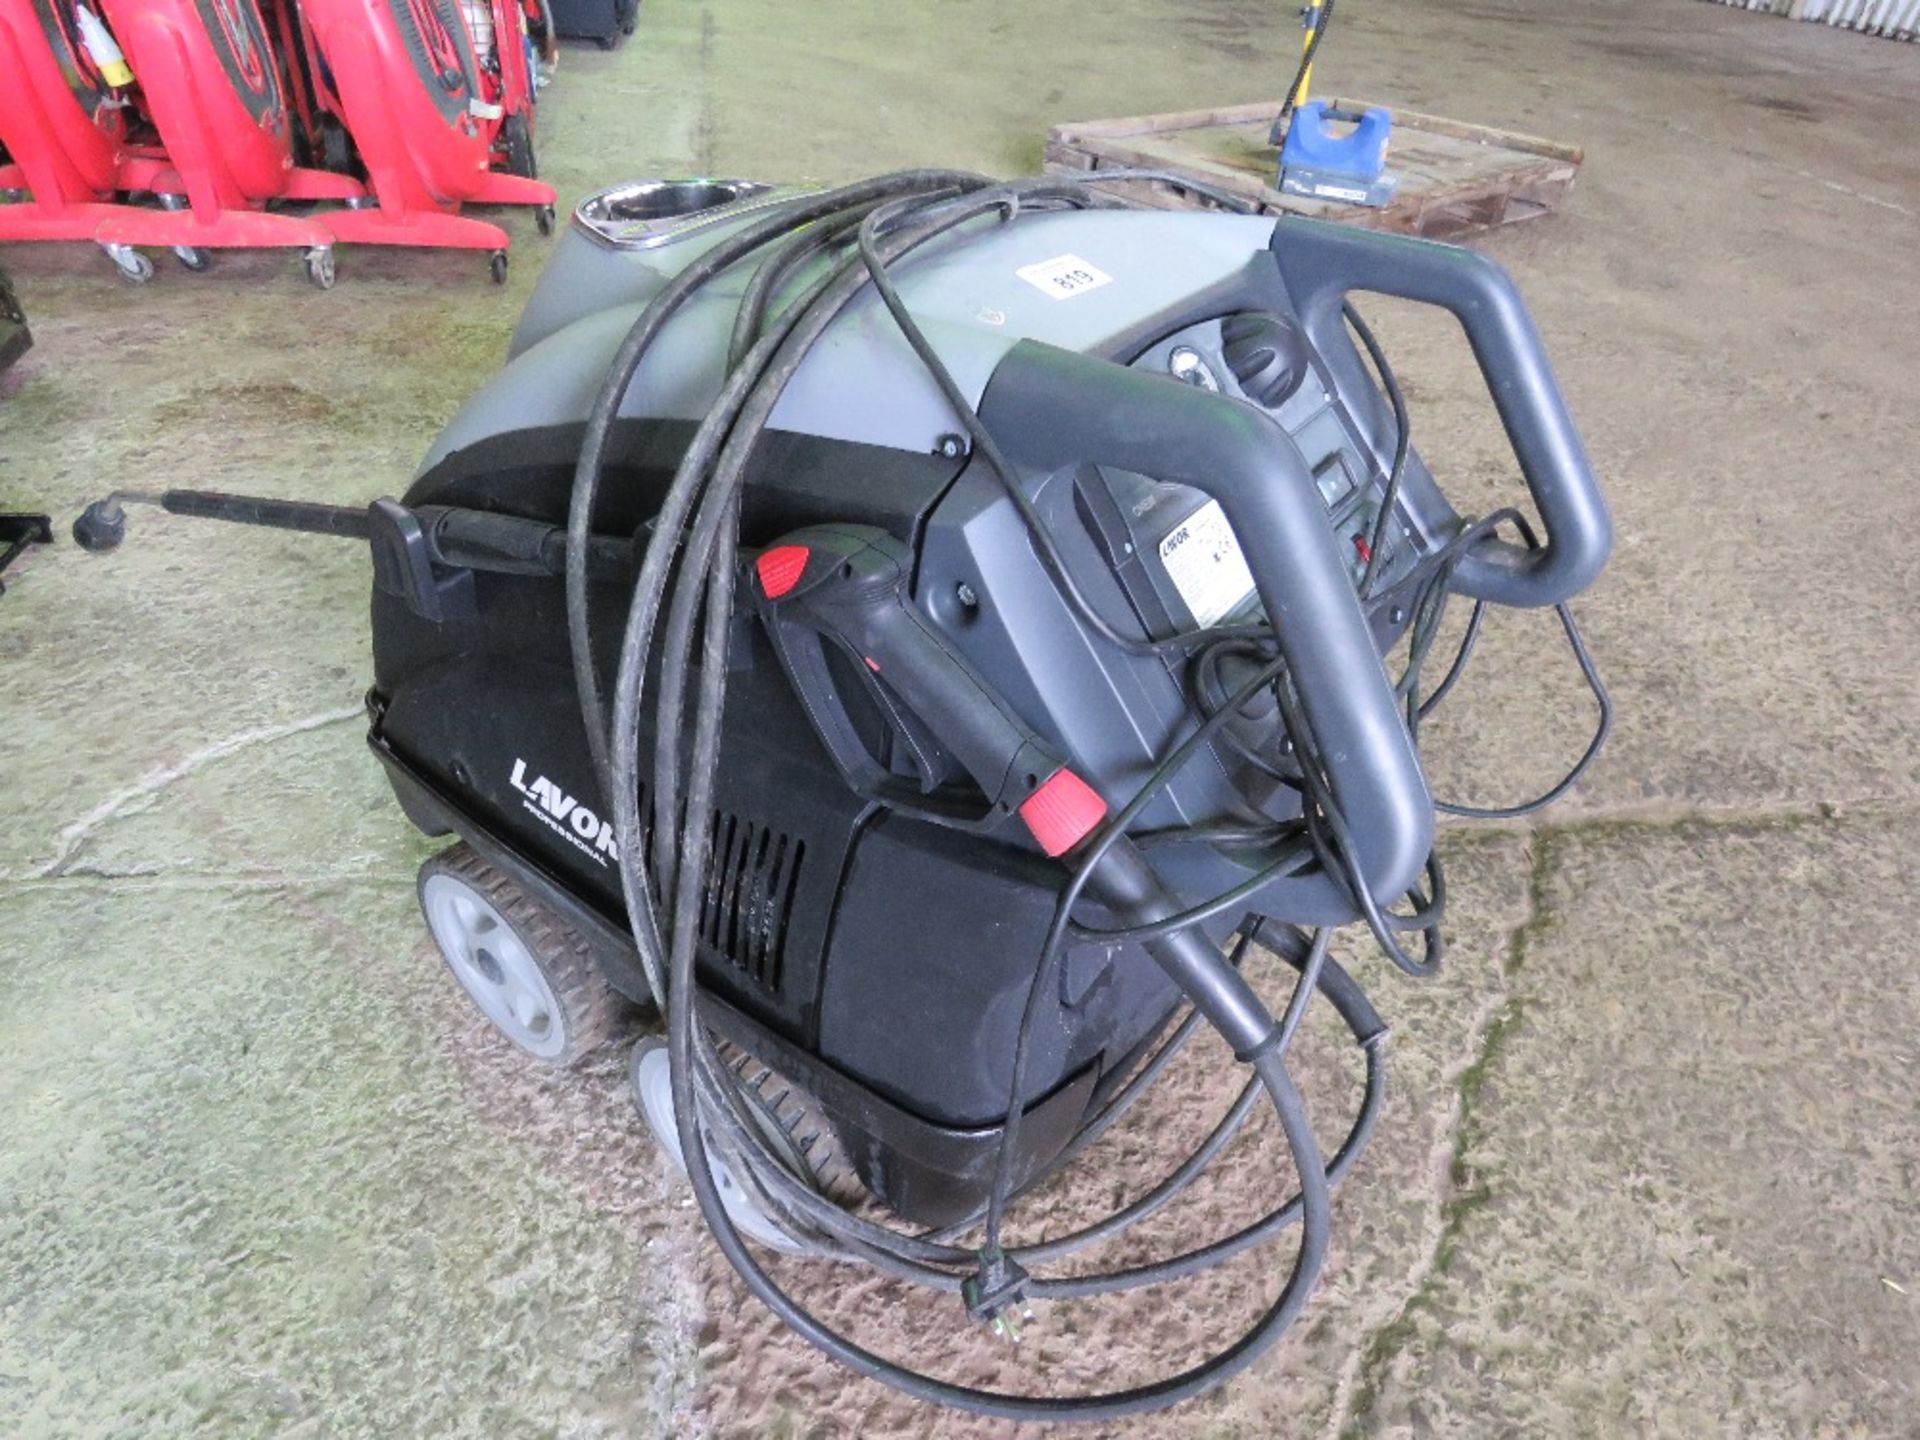 LAVOR 58KW PROFESSIONAL STEAM CLEANER, 240 VOLT, LITTLE USED SINCE PURCHASE IN SEPTEMBER 2021. WITH